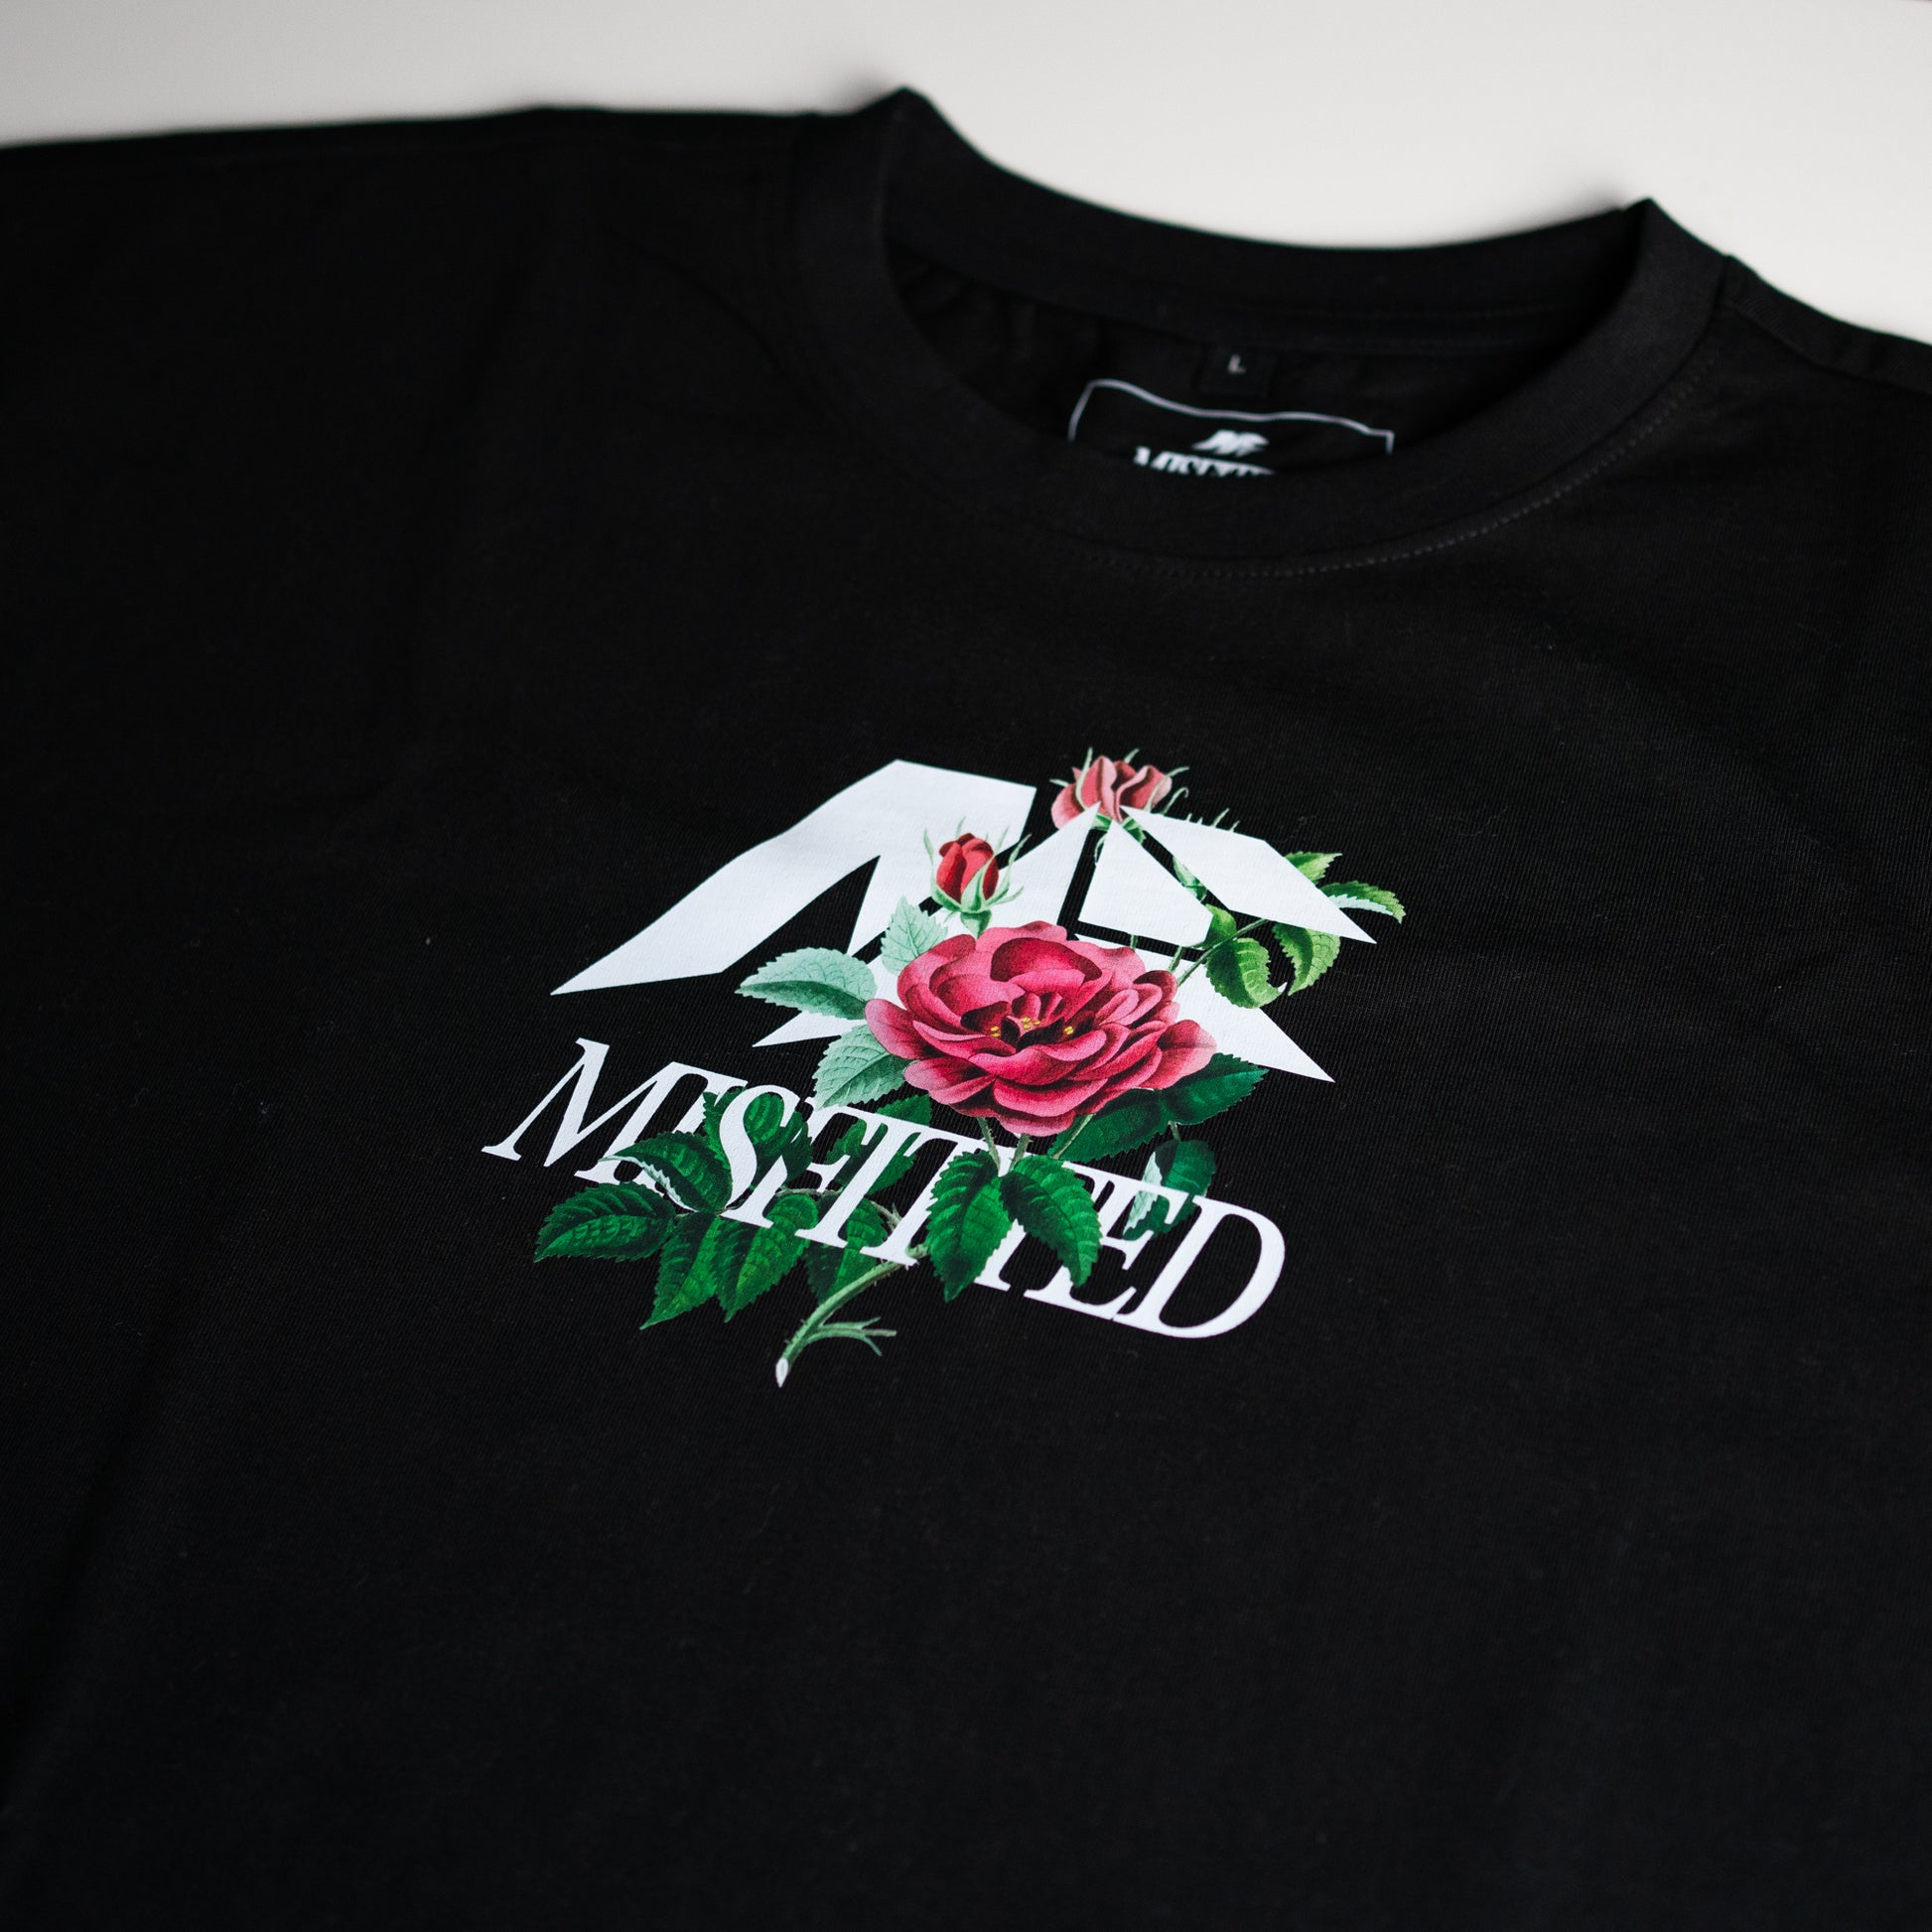 Black MisFitted Roses Shirt